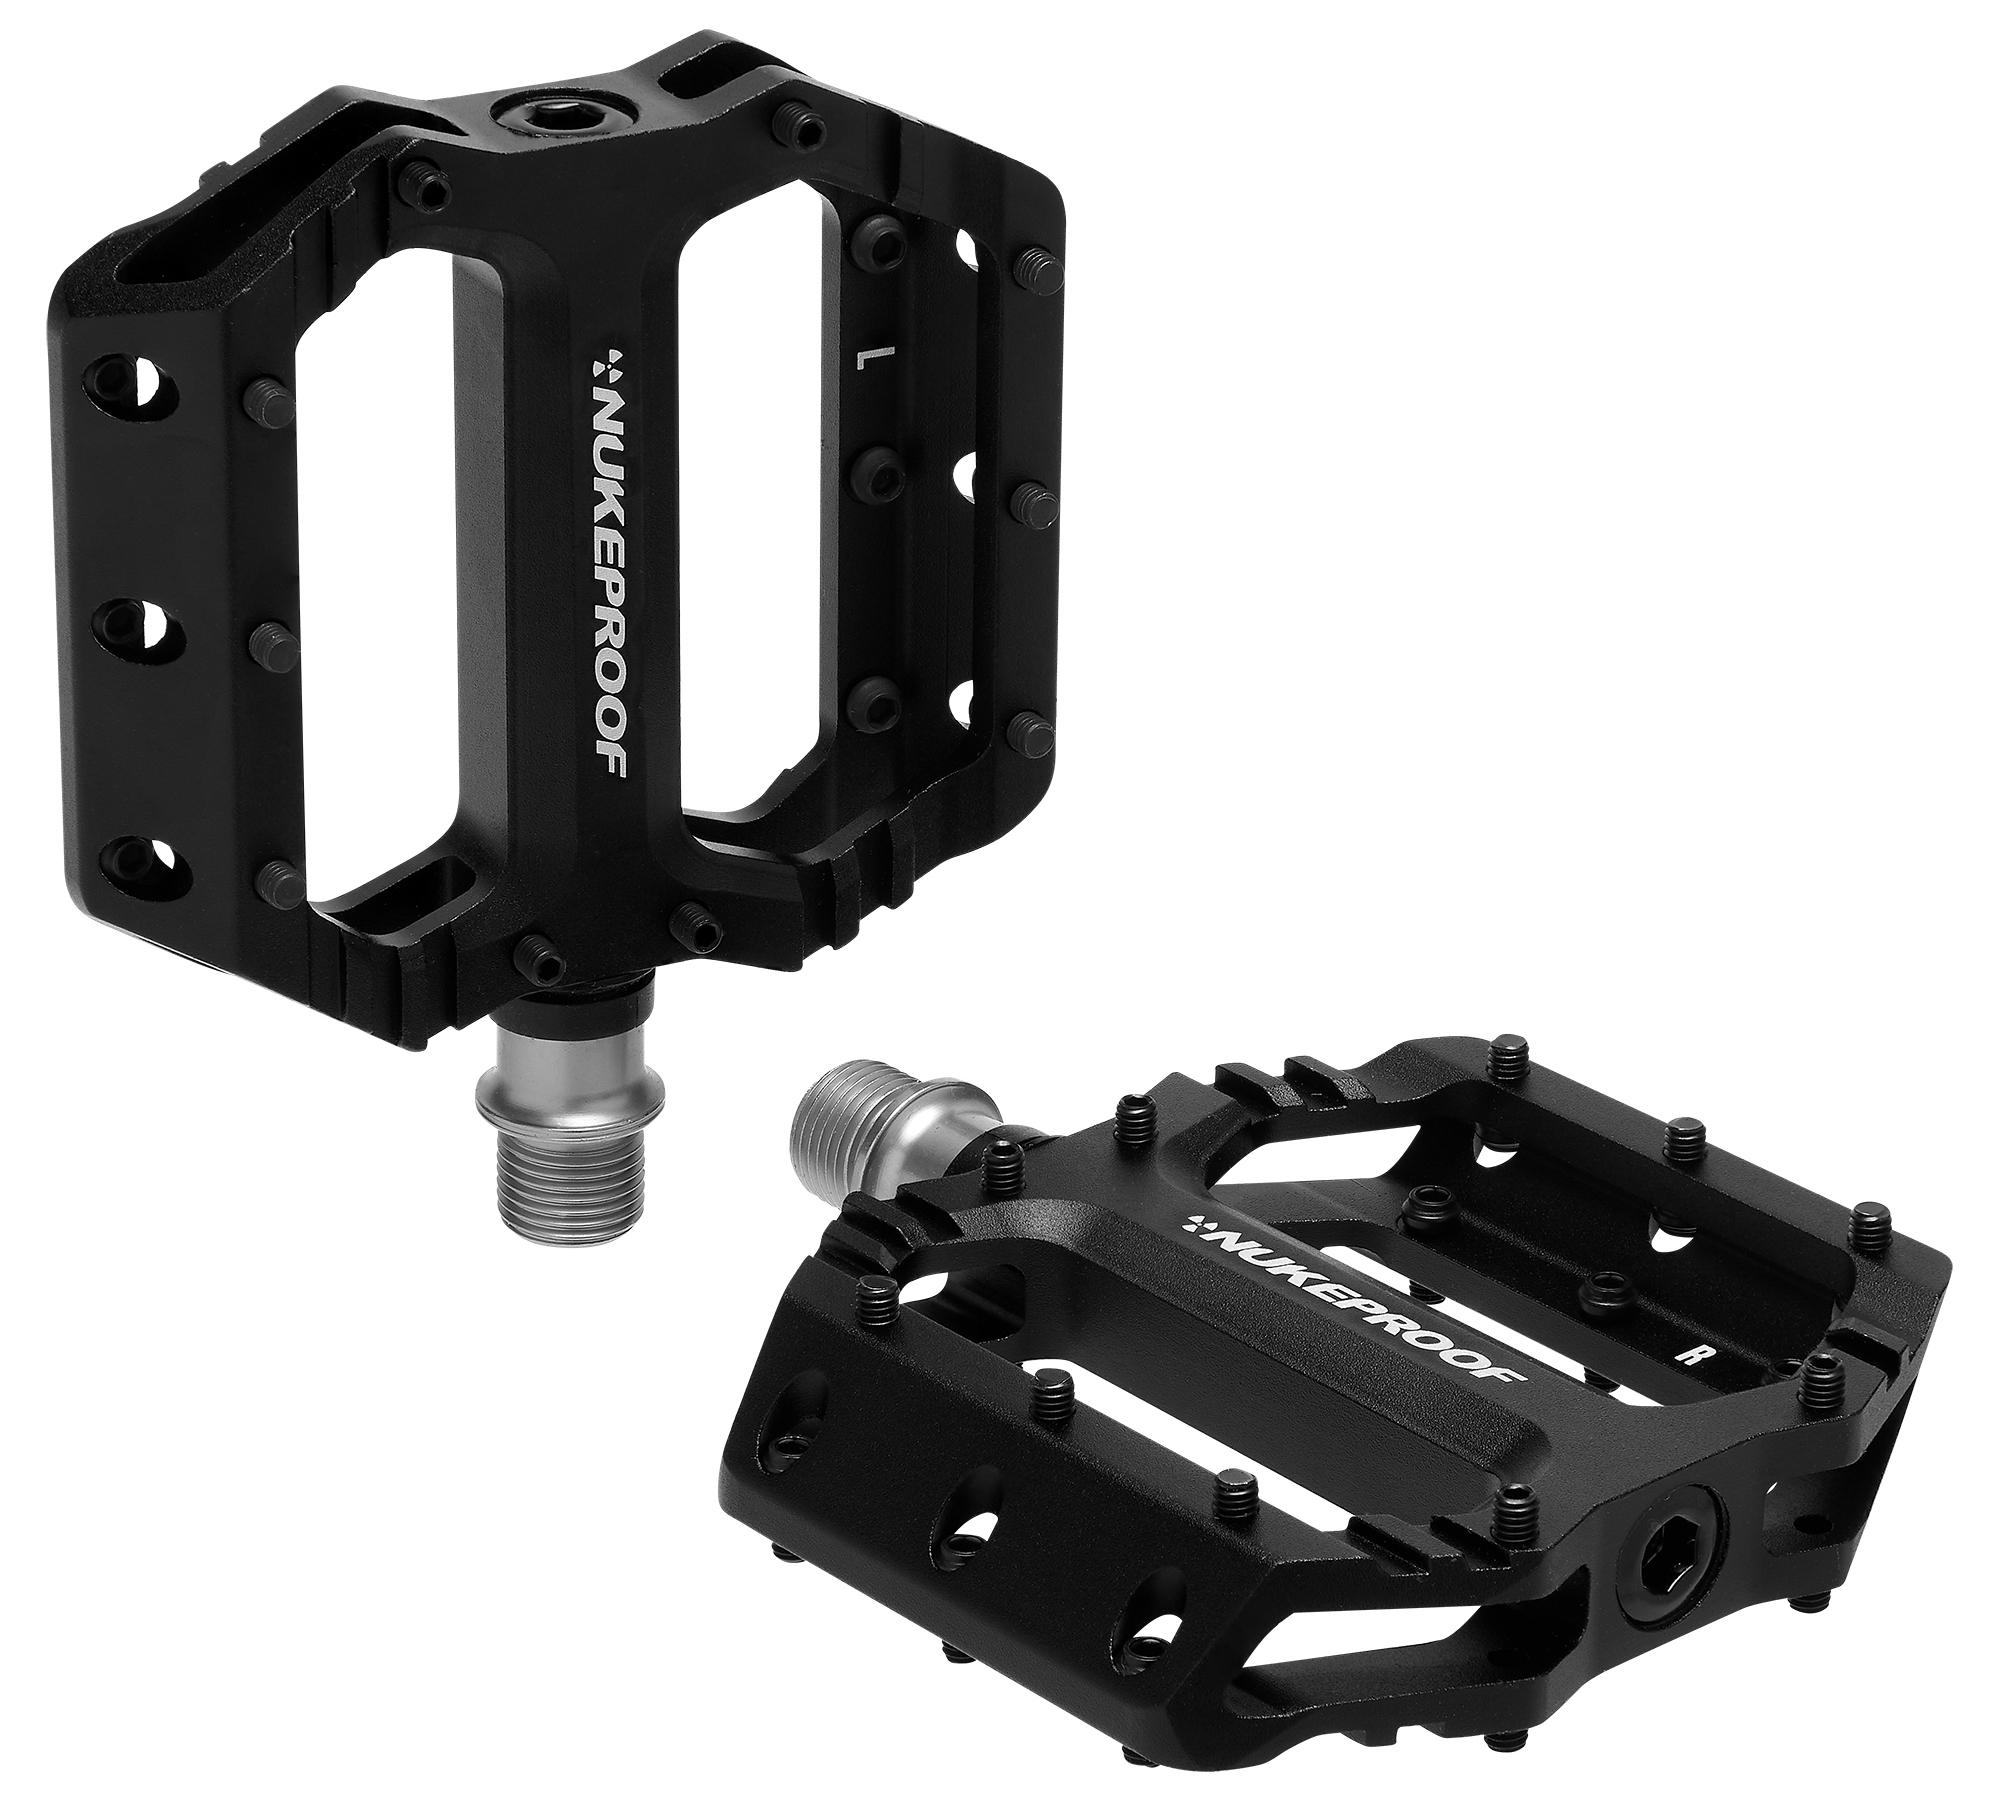 Nukeproof Urchin Youth Flat Pedals - Black